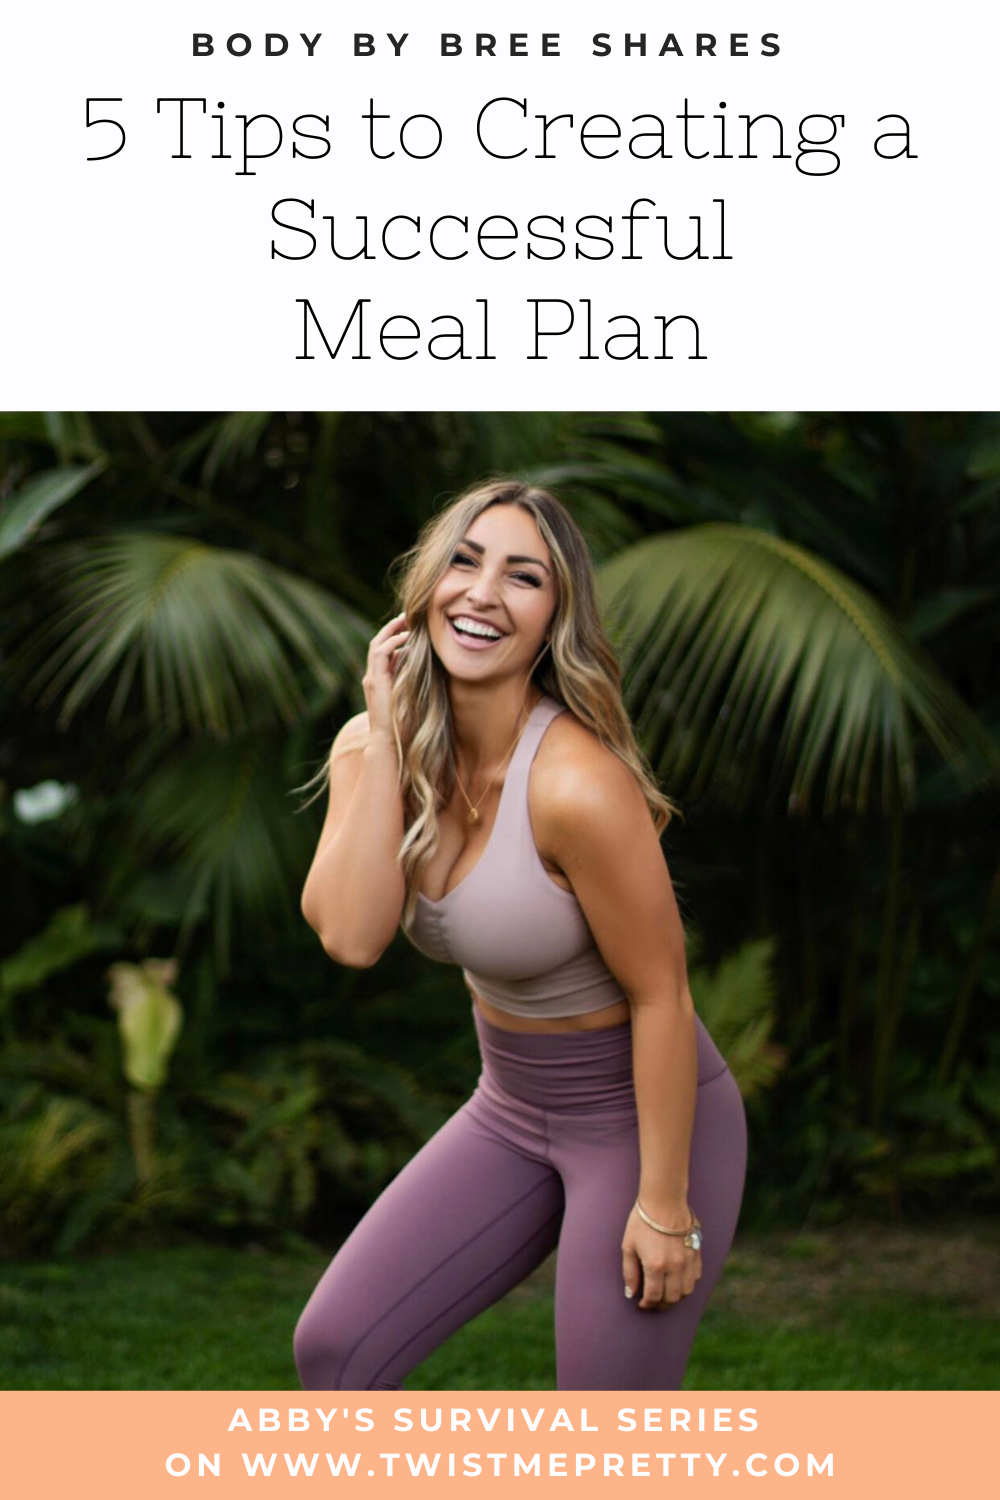 Body By Bree shares 5 Tips to Creating a Successful Meal Plan. A post in Abby's Survival Series. www.TwistMePretty.com